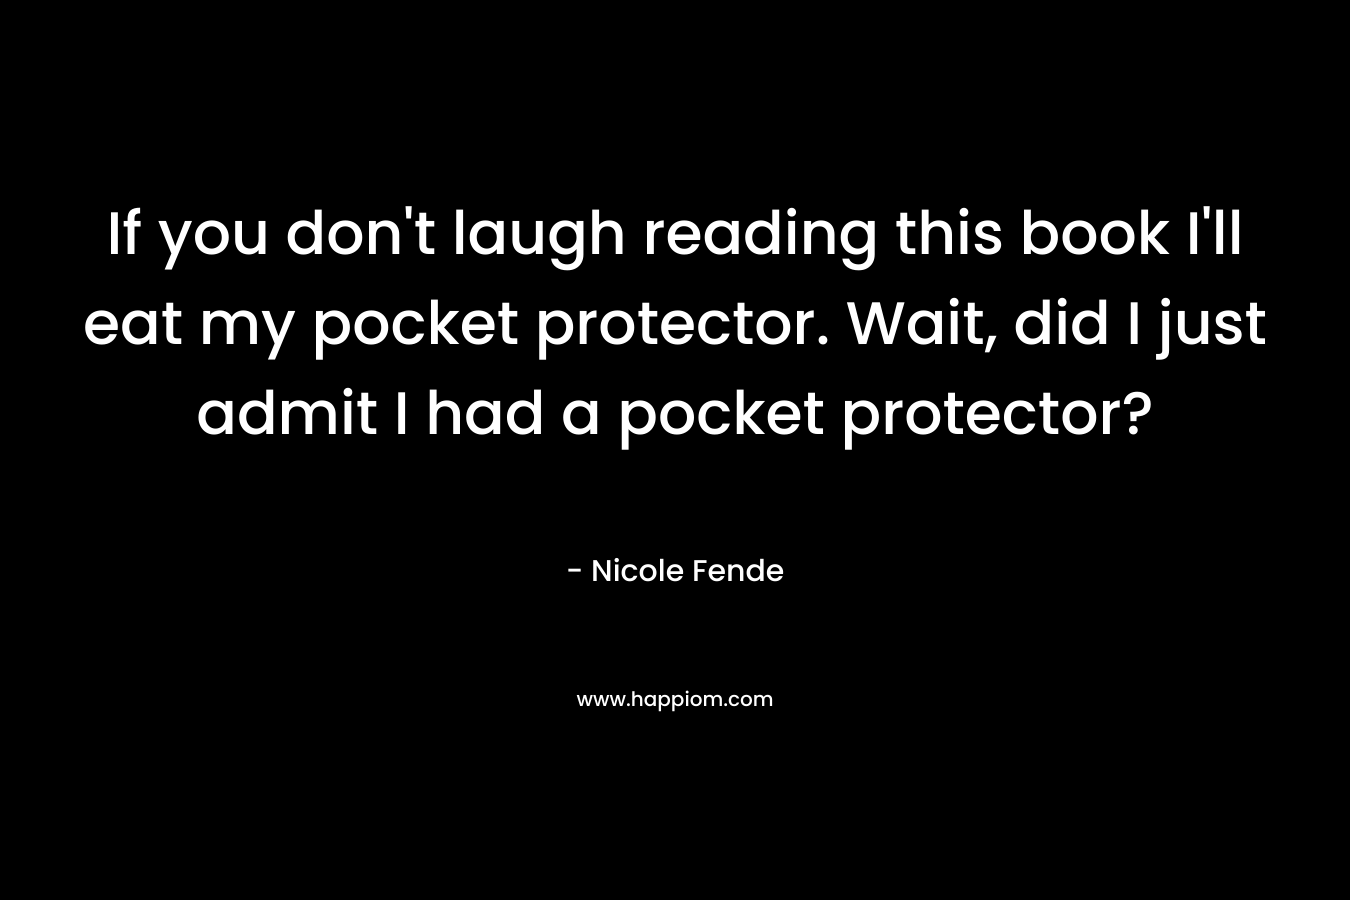 If you don’t laugh reading this book I’ll eat my pocket protector. Wait, did I just admit I had a pocket protector? – Nicole Fende